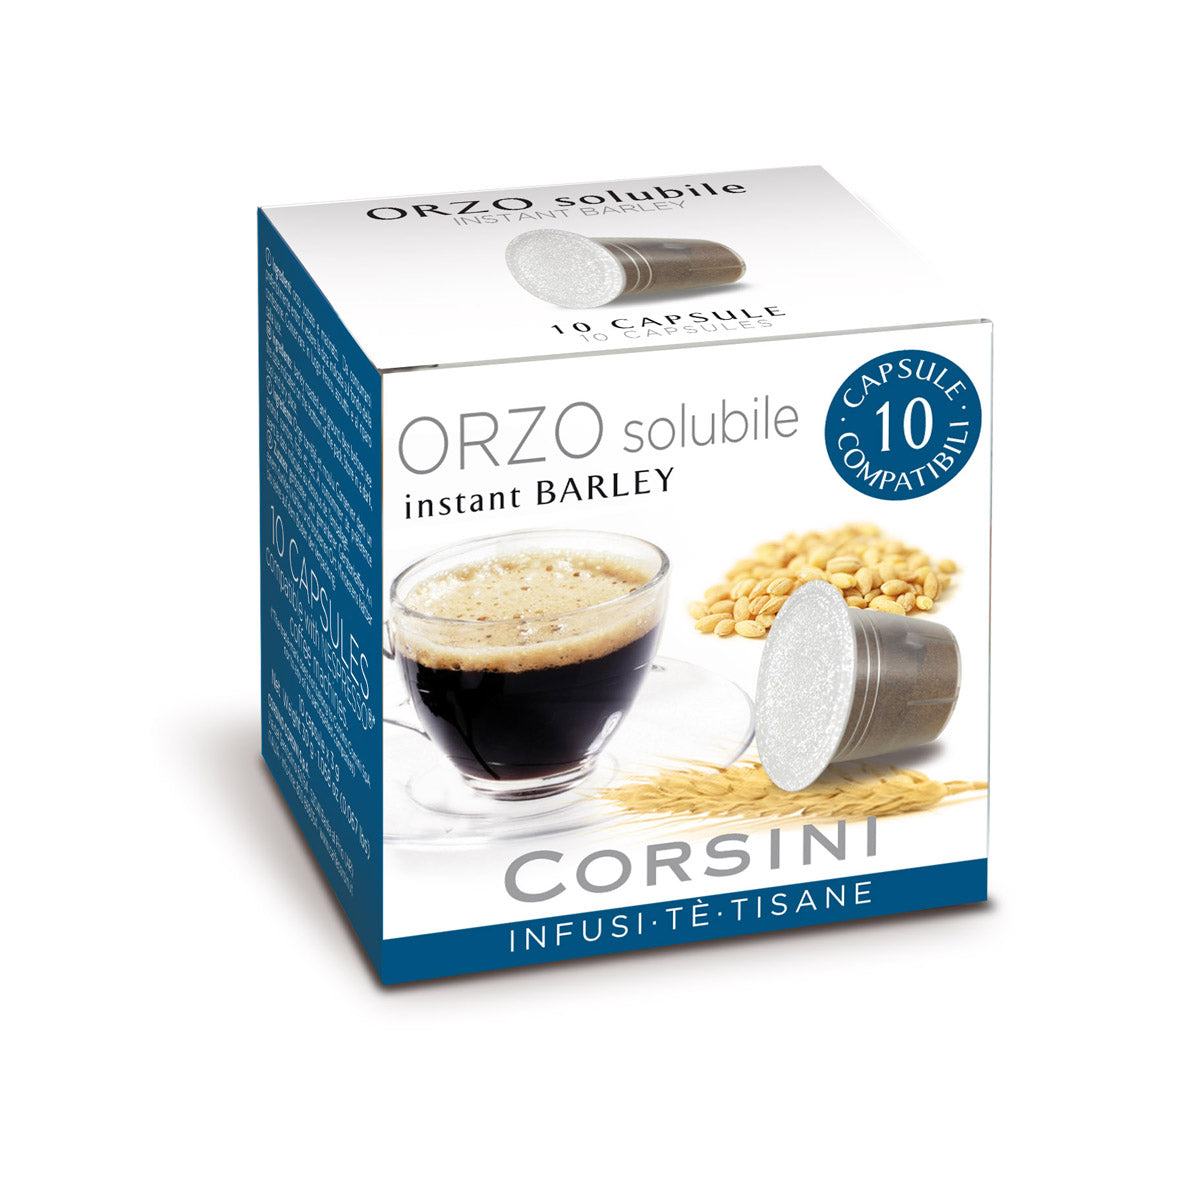 10 Nespresso® compatible barley coffee capsules | Instant barley | Box of 12 packs